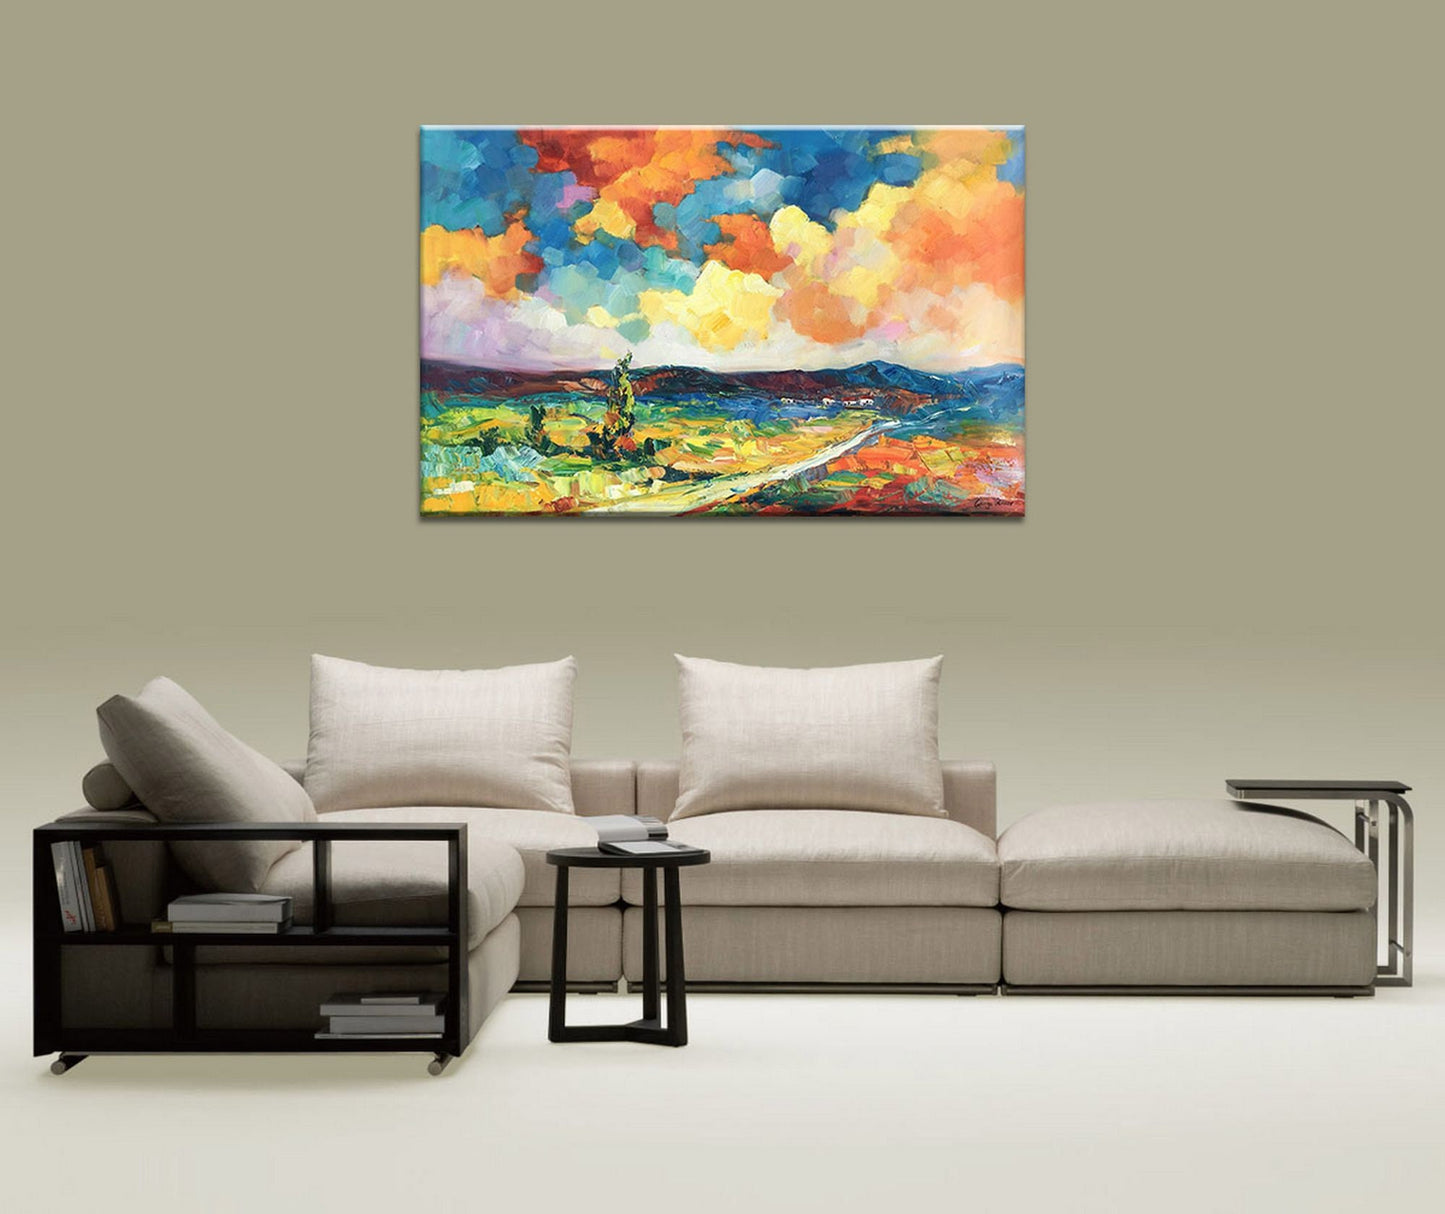 Large Landscape Oil Painting, Original Art, Rustic Living Room Decor, Original Landscape Oil Paintings, Large Painting, Family Wall Decor